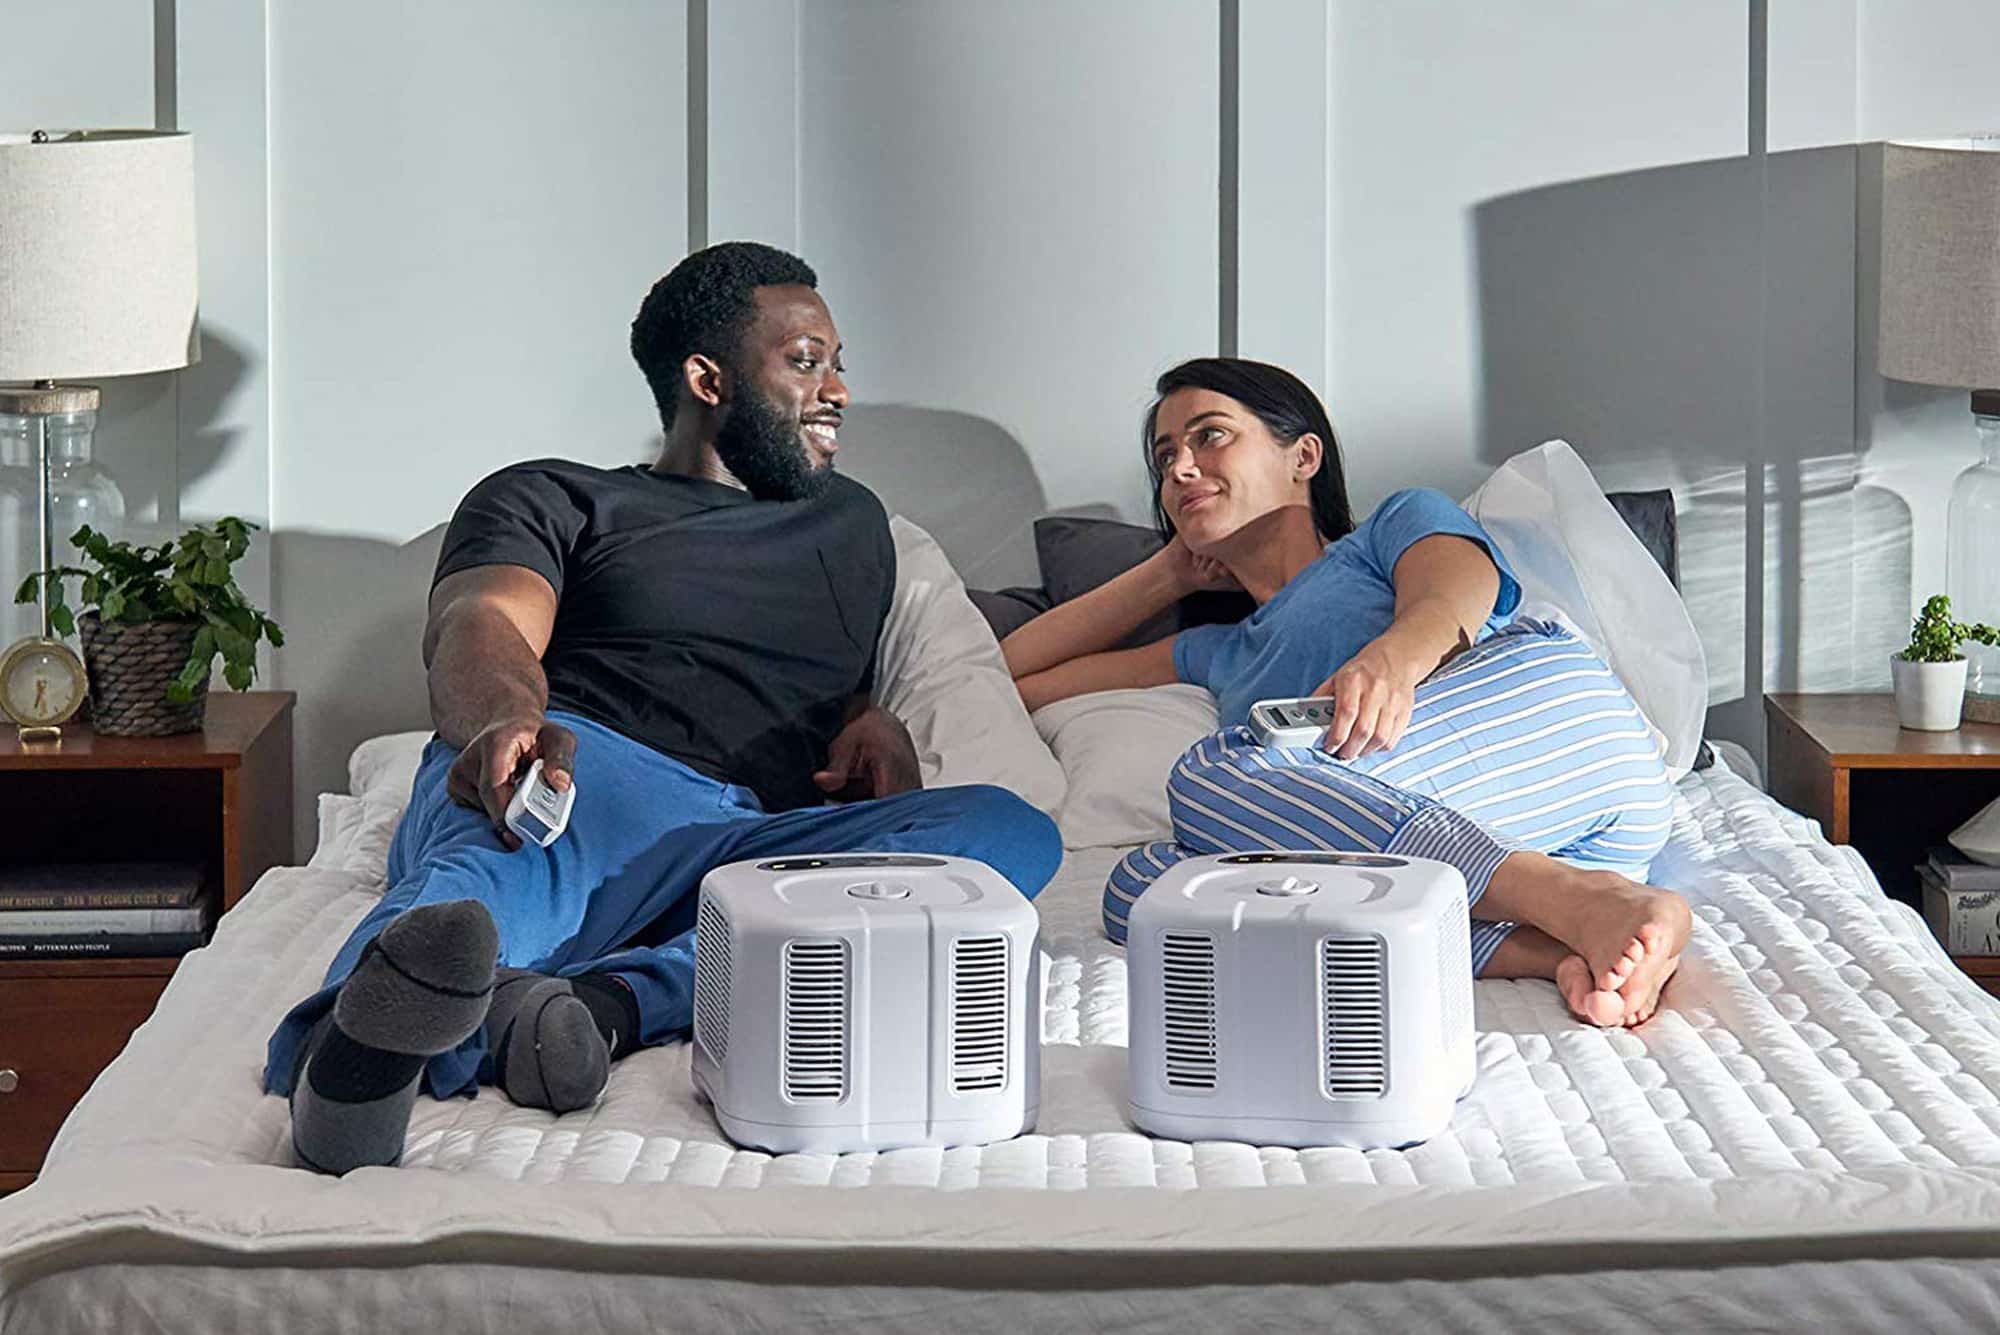 chilipad review reddit - The chiliPAD Review: Does This Bed Cooler Really Work?